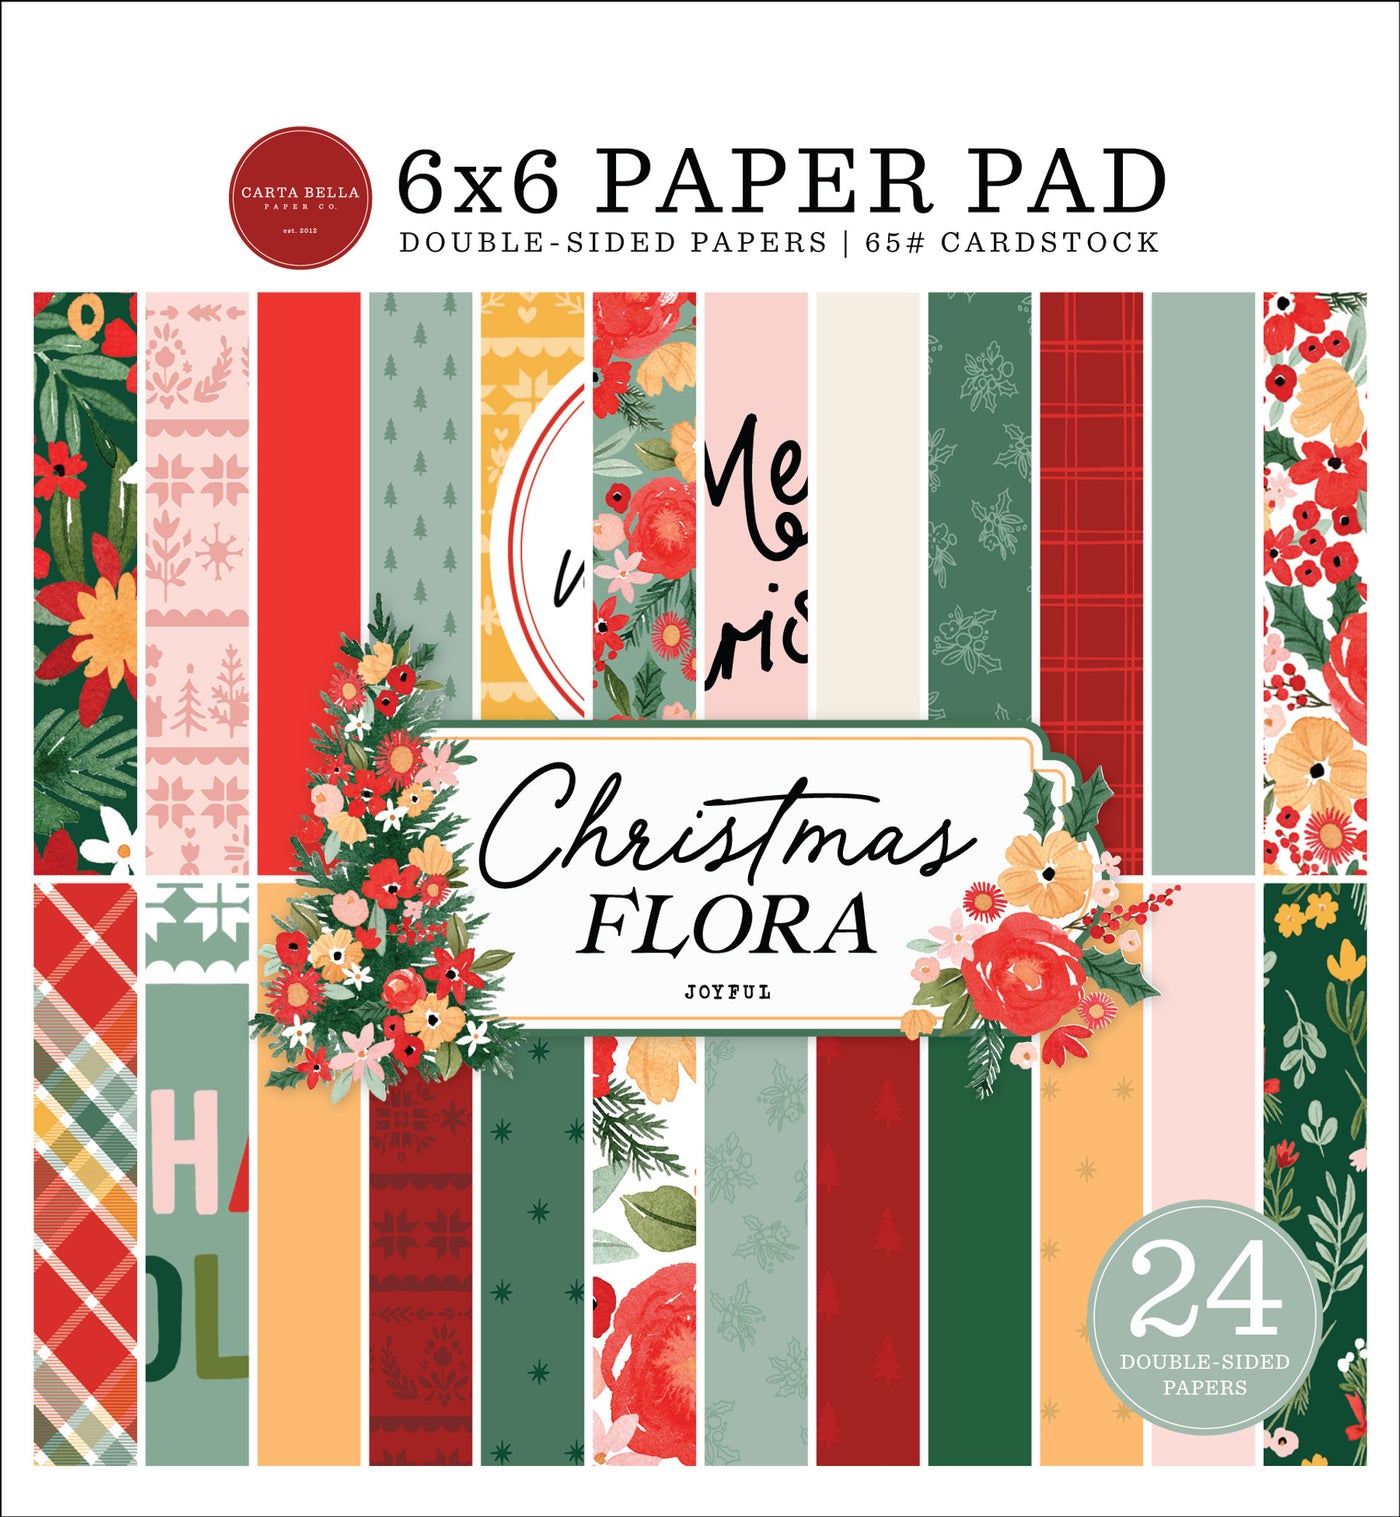 Christmas Flora is a 6x6 pad with 24 double-sided sheets. It is great for Christmas card making and other seasonal craft projects. It matches Carta Bella Joyful Christmas Flora.  